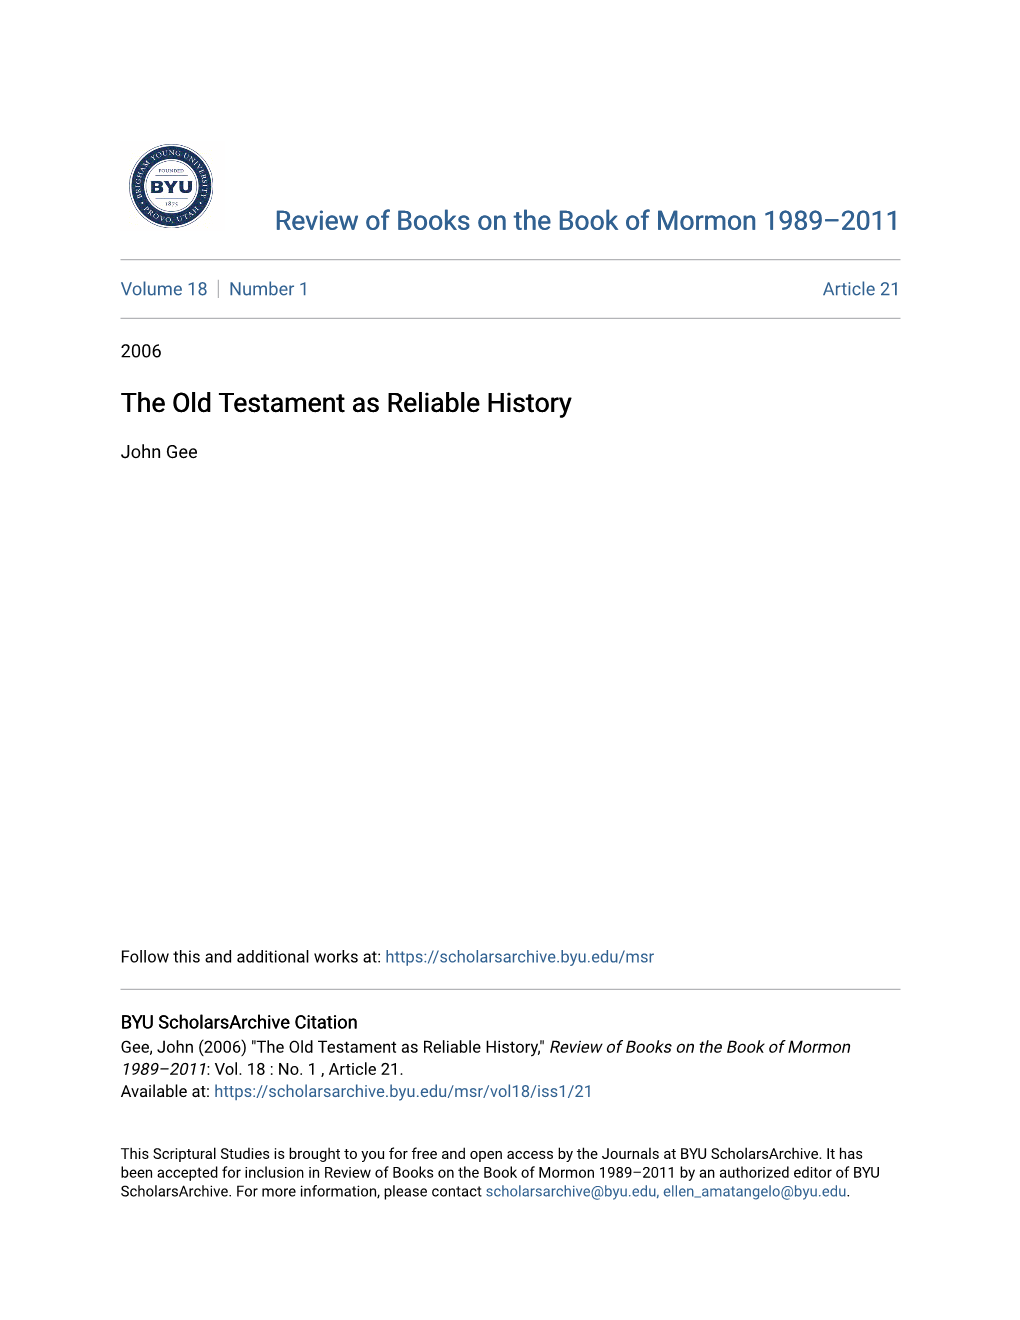 The Old Testament As Reliable History